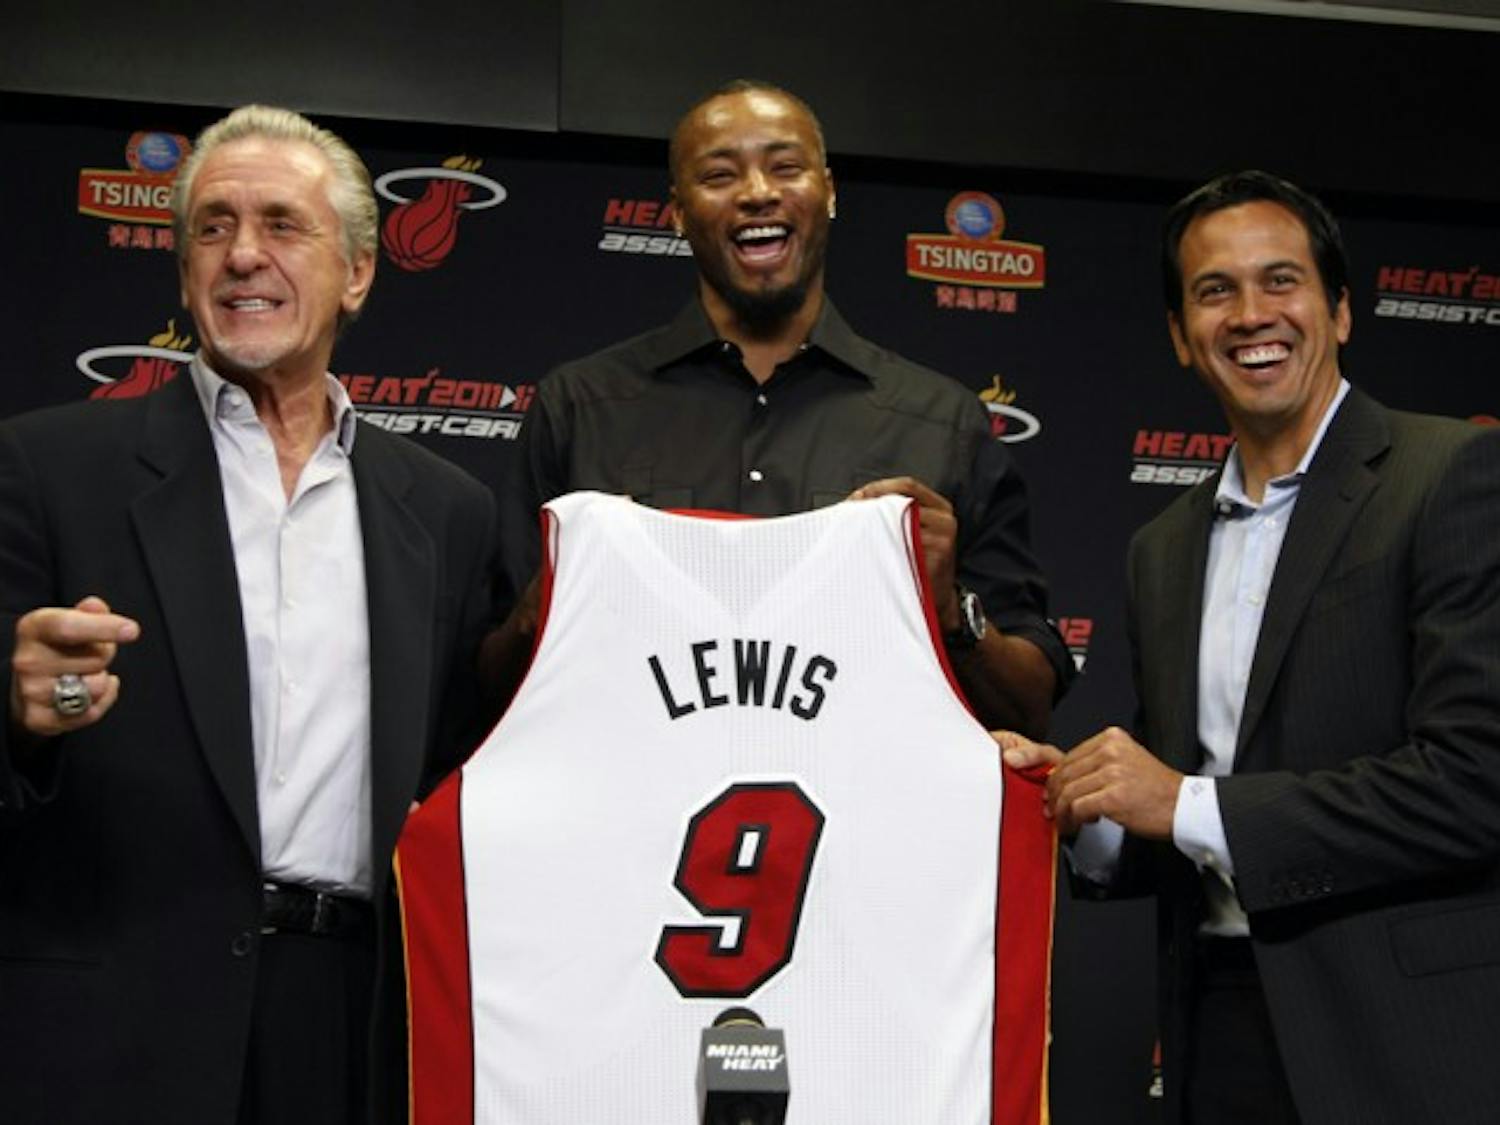 Miami Heat president Pat Riley, left, forward Rashard Lewis, center, and head coach Erik Spoelstra, right, hold up Lewis' jersey after he signed an NBA basketball contract with the Heat, Wednesday, July 11, 2012, in Miami. (AP Photo/Lynne Sladky)